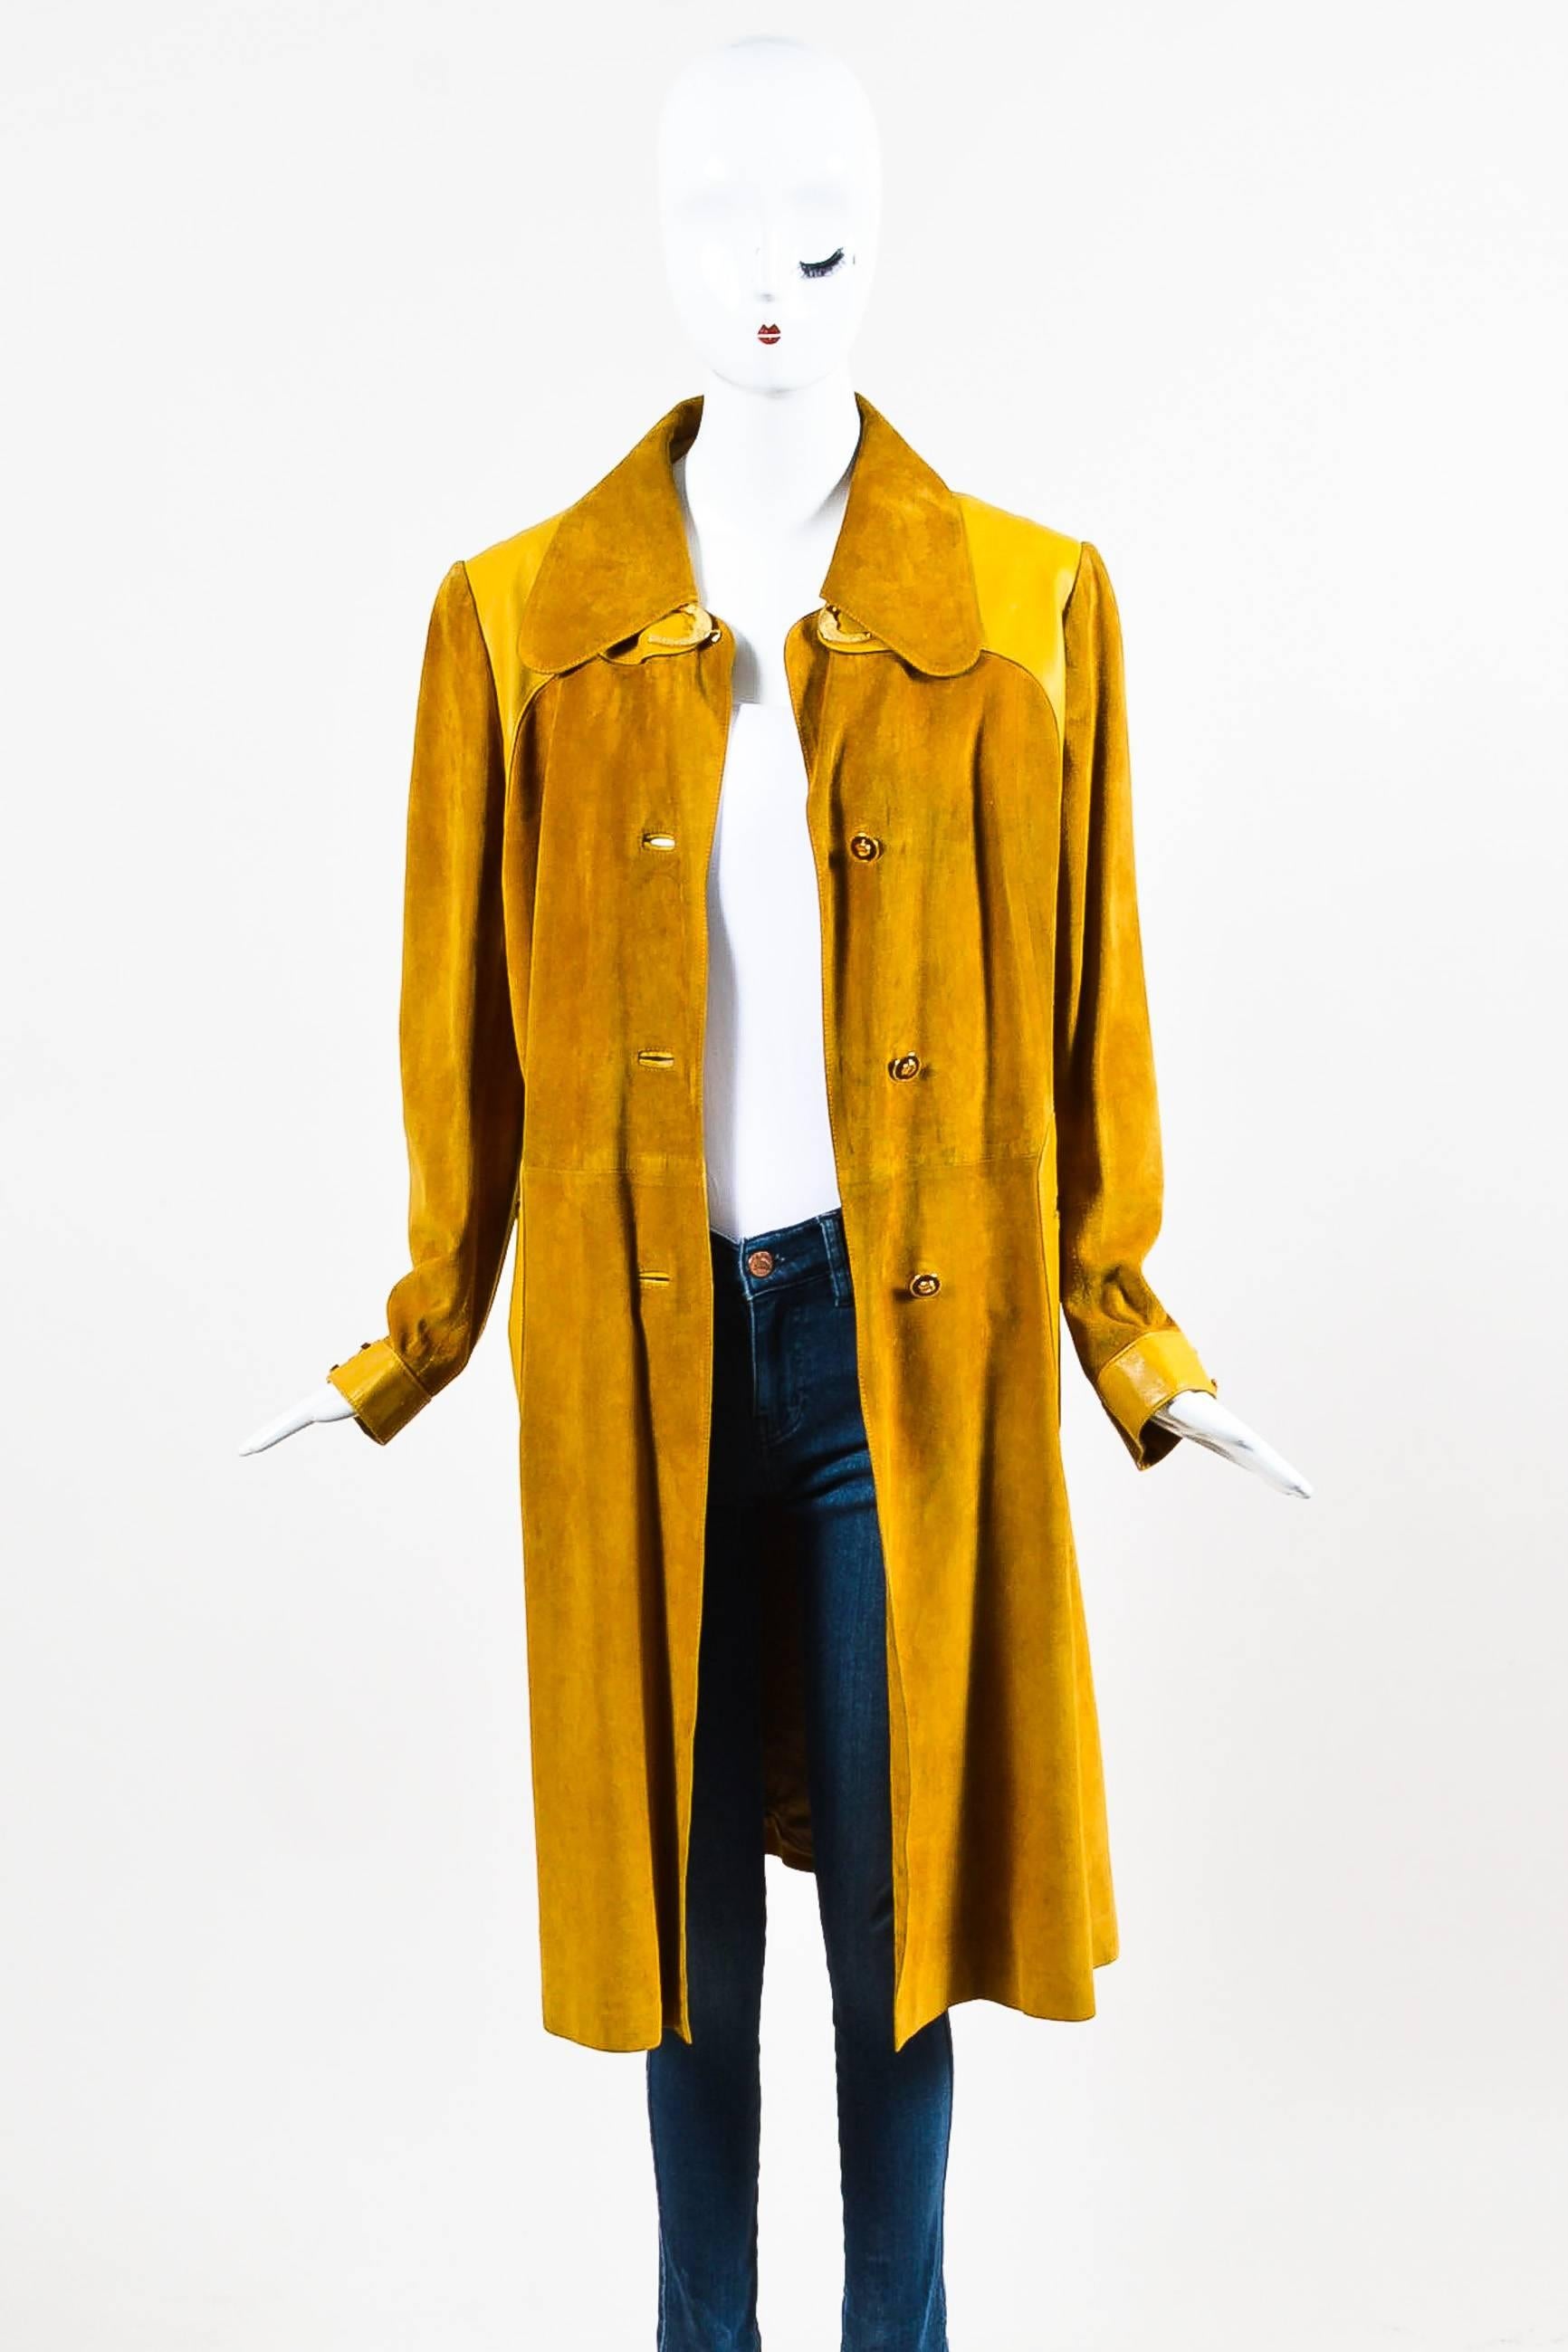 Mustard yellow suede coat with matching leather trim. Long sleeves with gold-tone horseshoe hardware. Front slit pockets. Center vent. Buttons up front. Lined.

Size: 
48 (IT)
12 (US) 

Measurements:
Total Length: 40.5"
Sleeve Length: